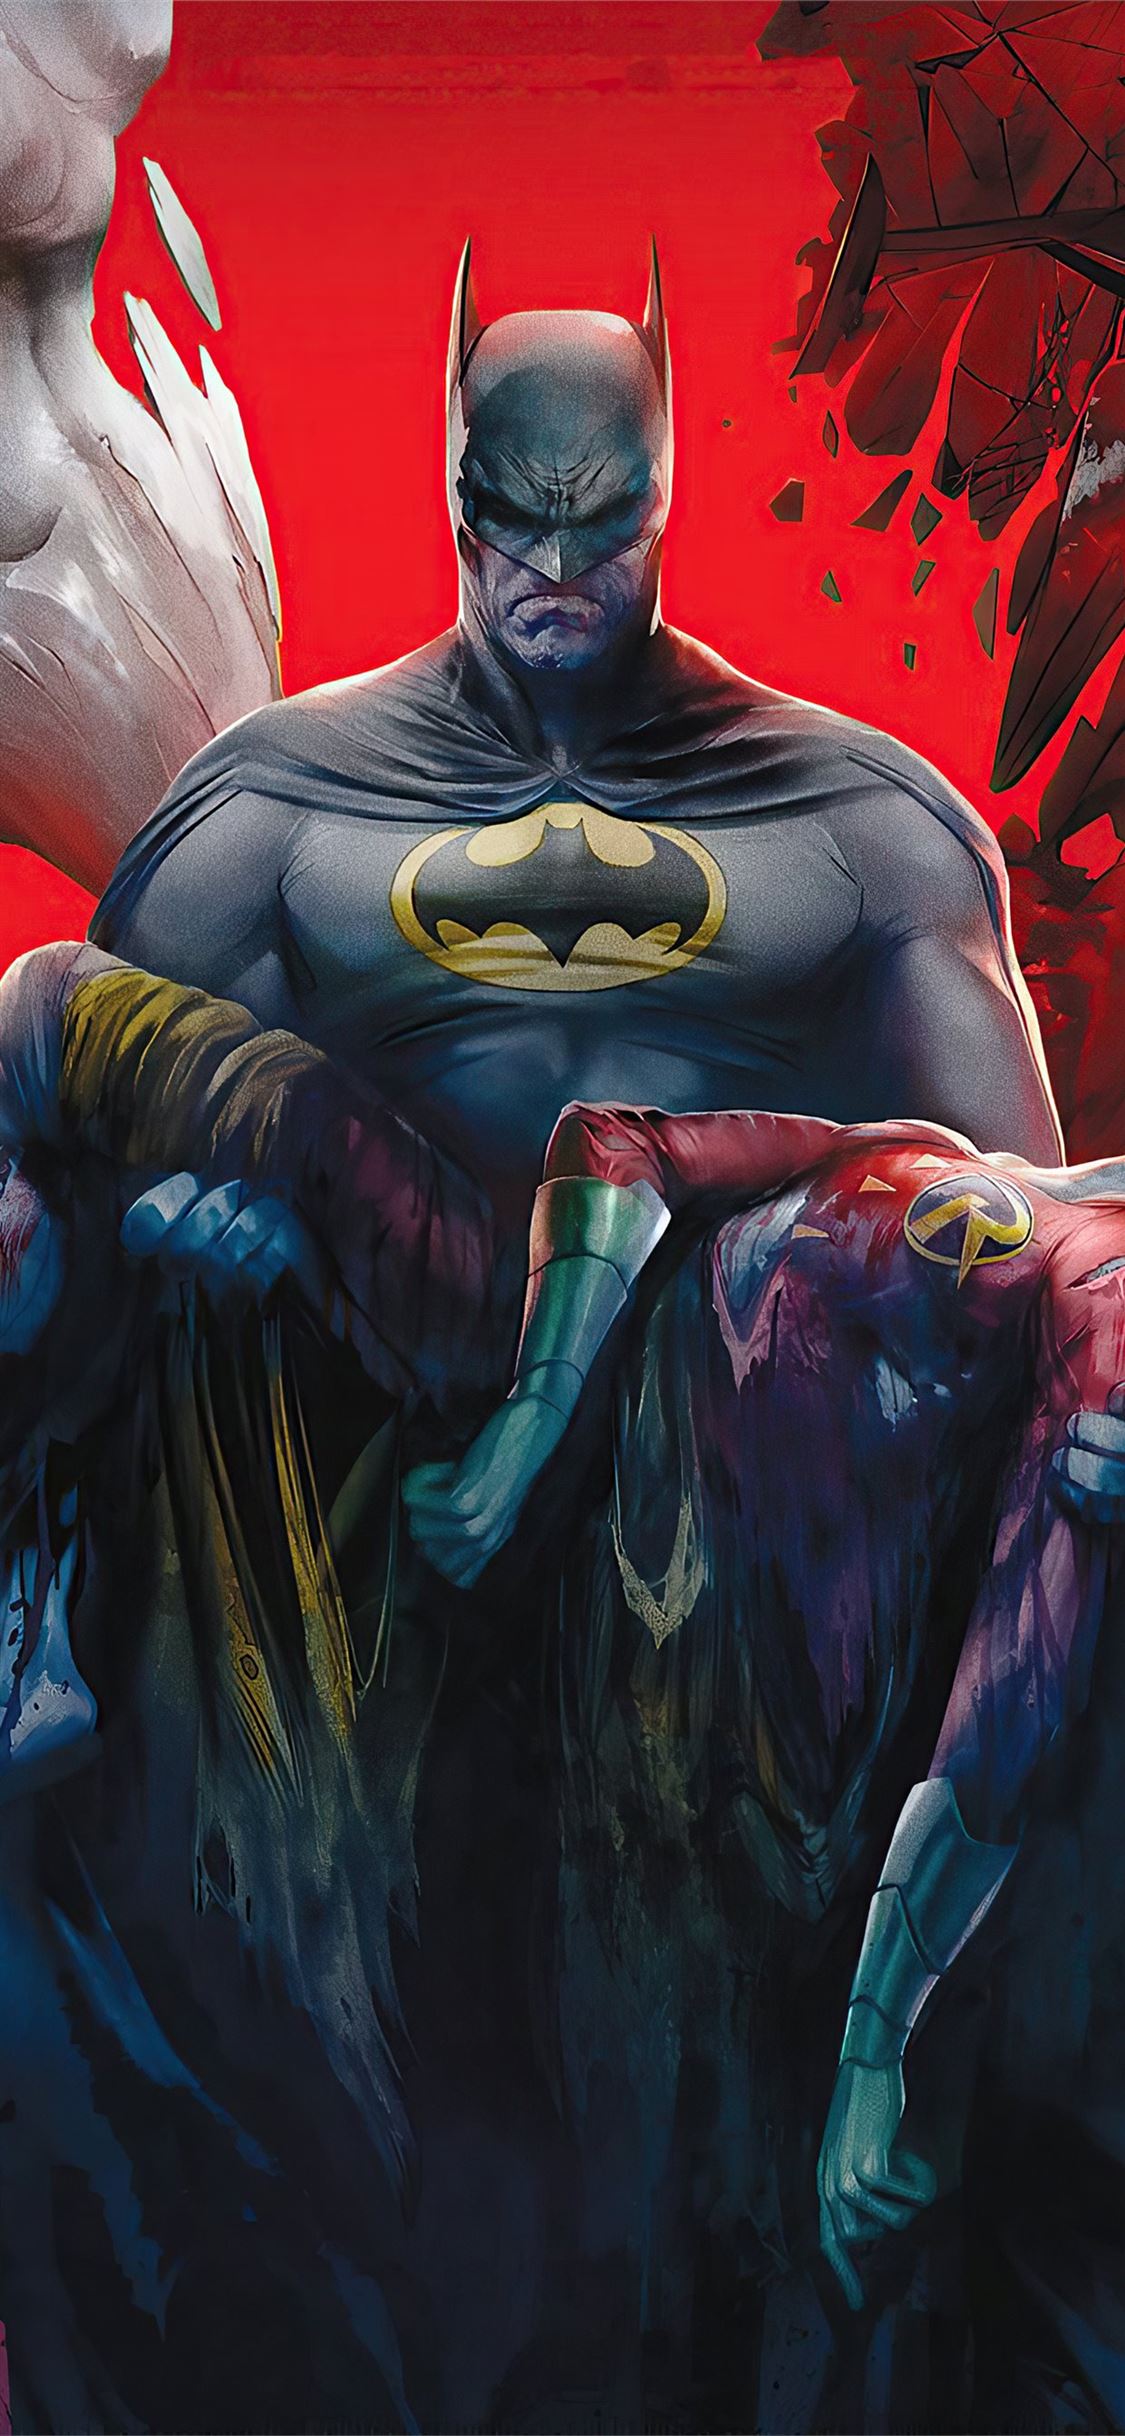 Batman Death In The Family iPhone X Wallpaper